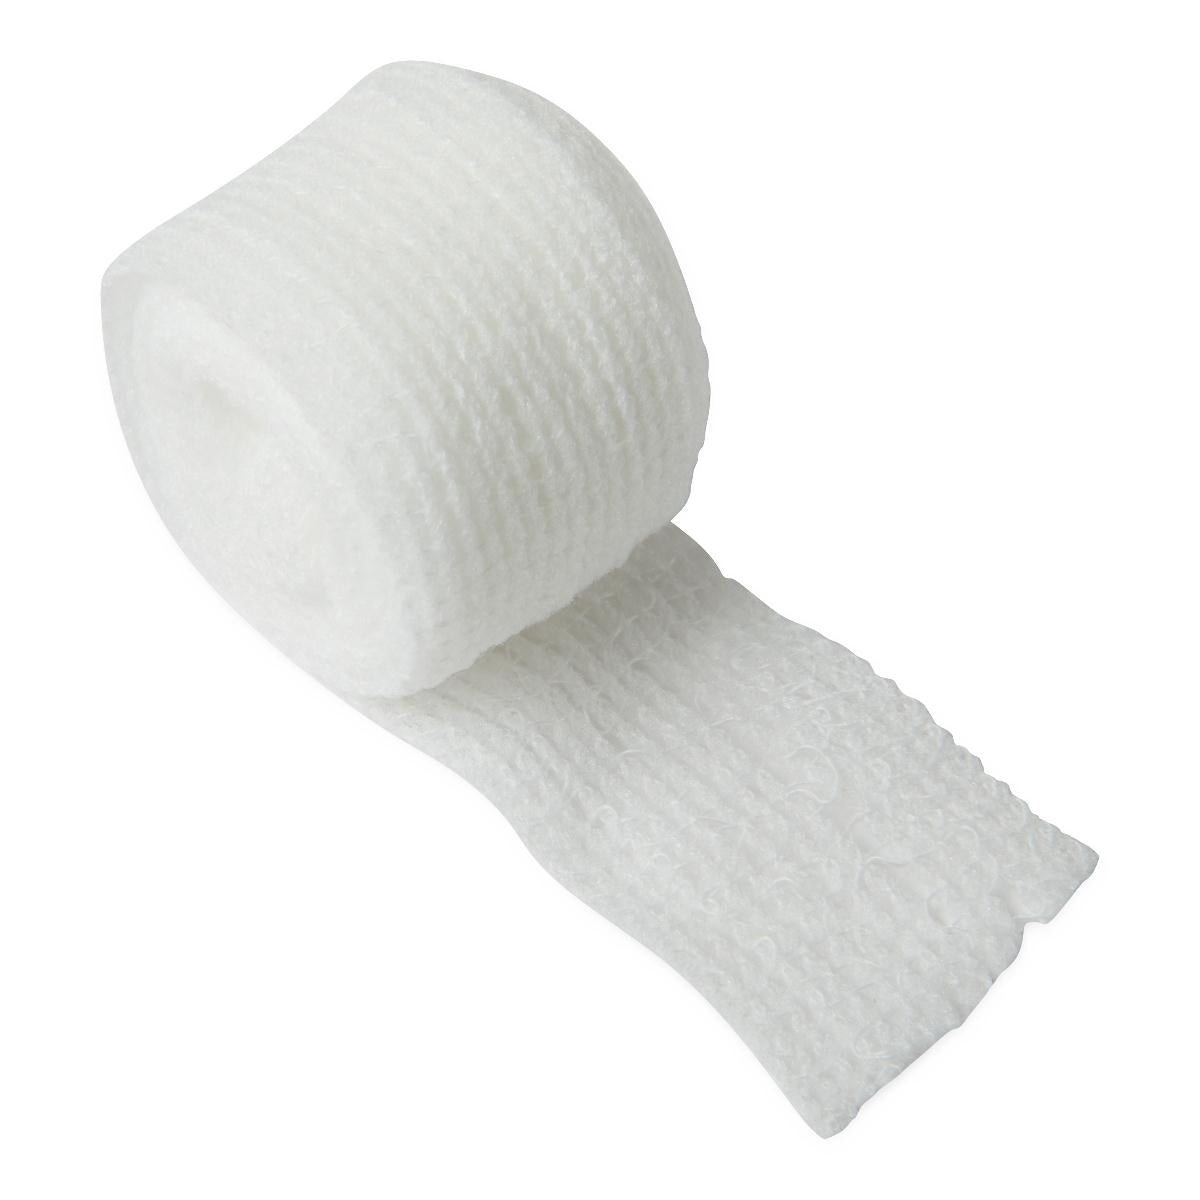 96 Each-Case / 75.00000 IN / Rayon/Polyester Wound Care - MEDLINE - Wasatch Medical Supply